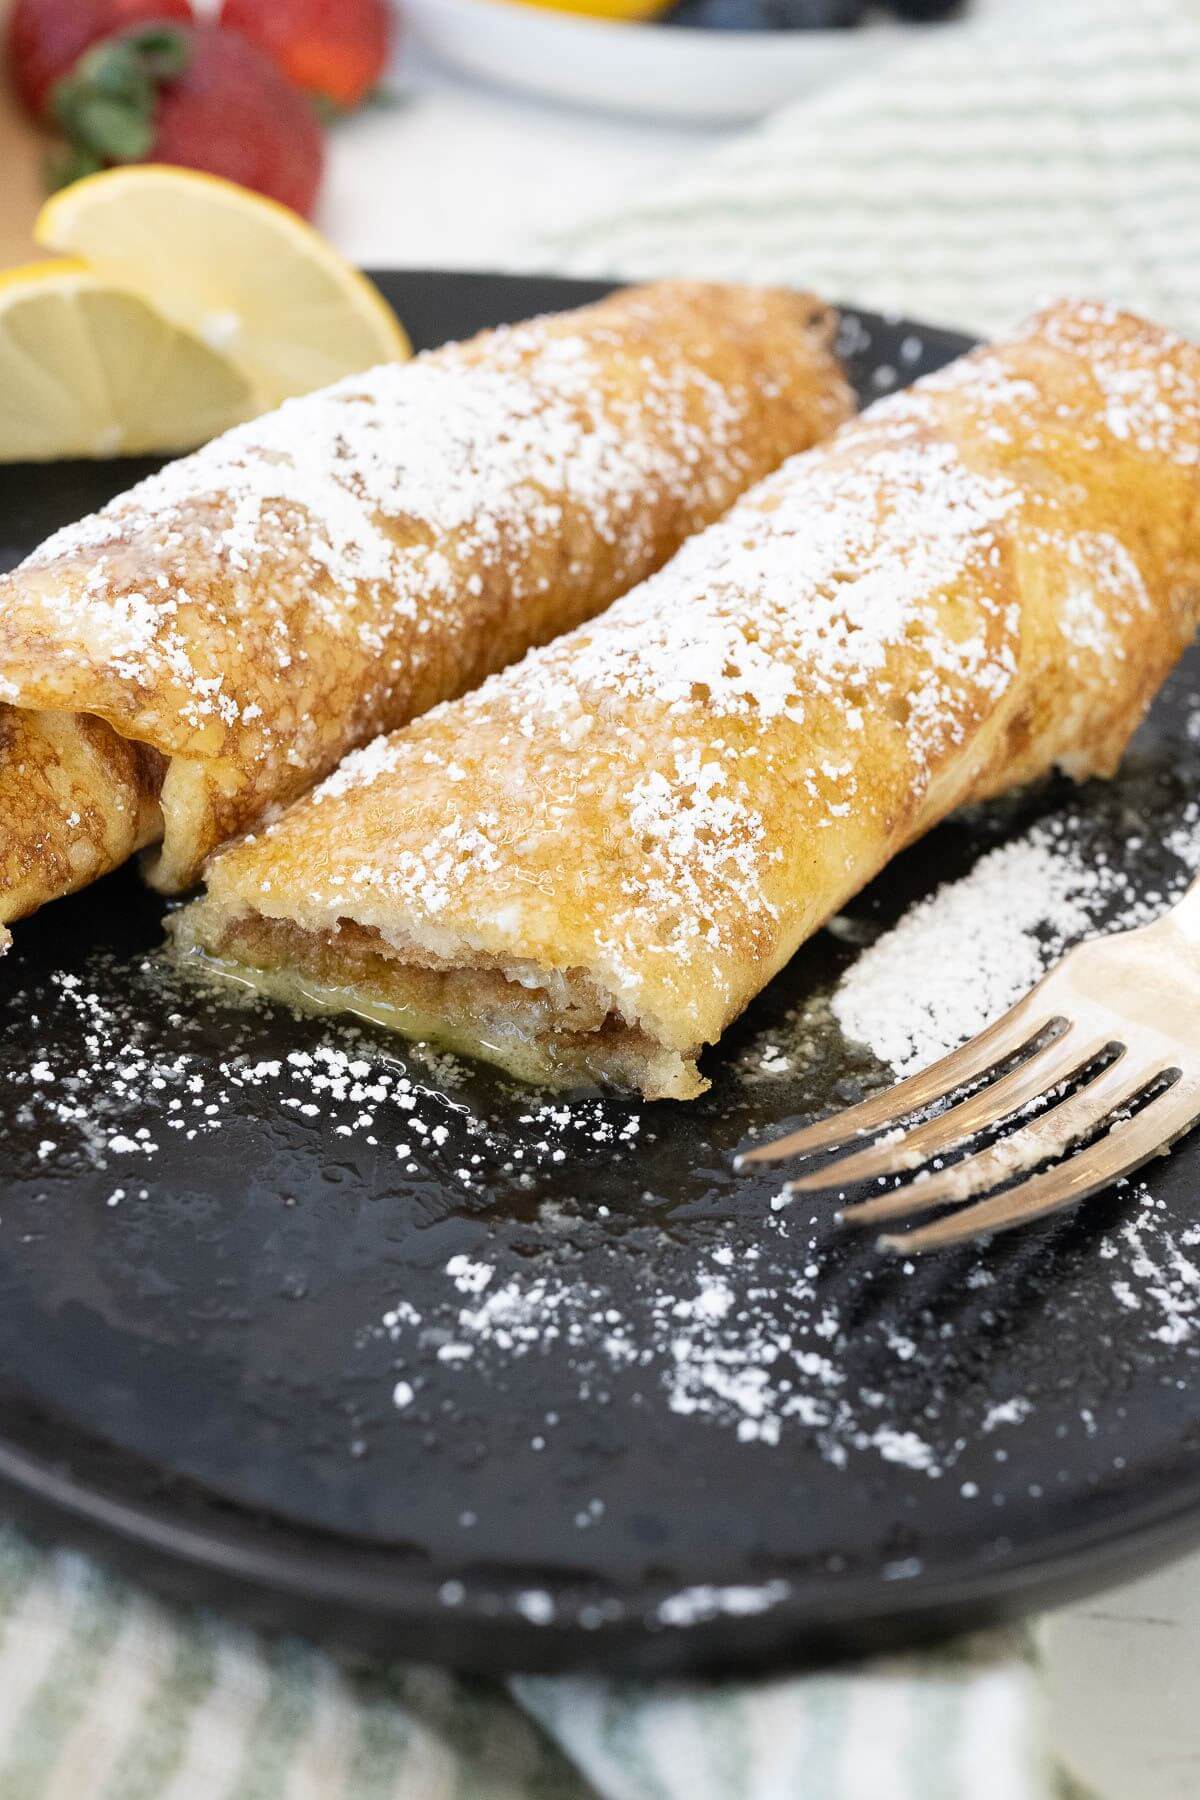 A fork lays next to two pancakes rolled up with powdered sugar on a plate.